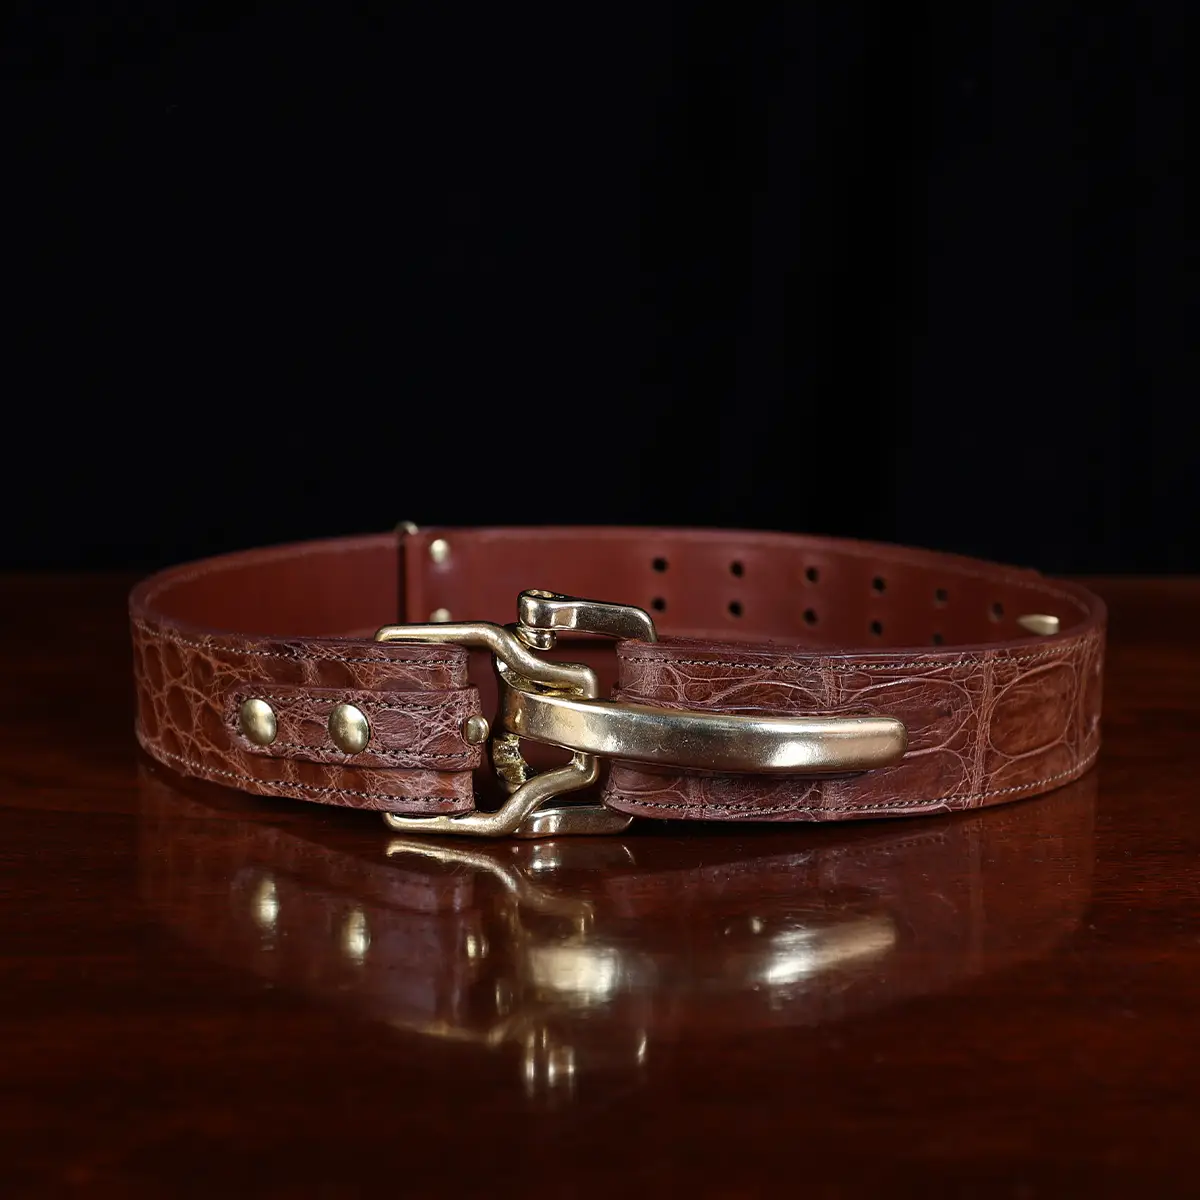 No. 5 Cinch Belt in brown American Alligator and brass buckle - ID 001 - front view on black background